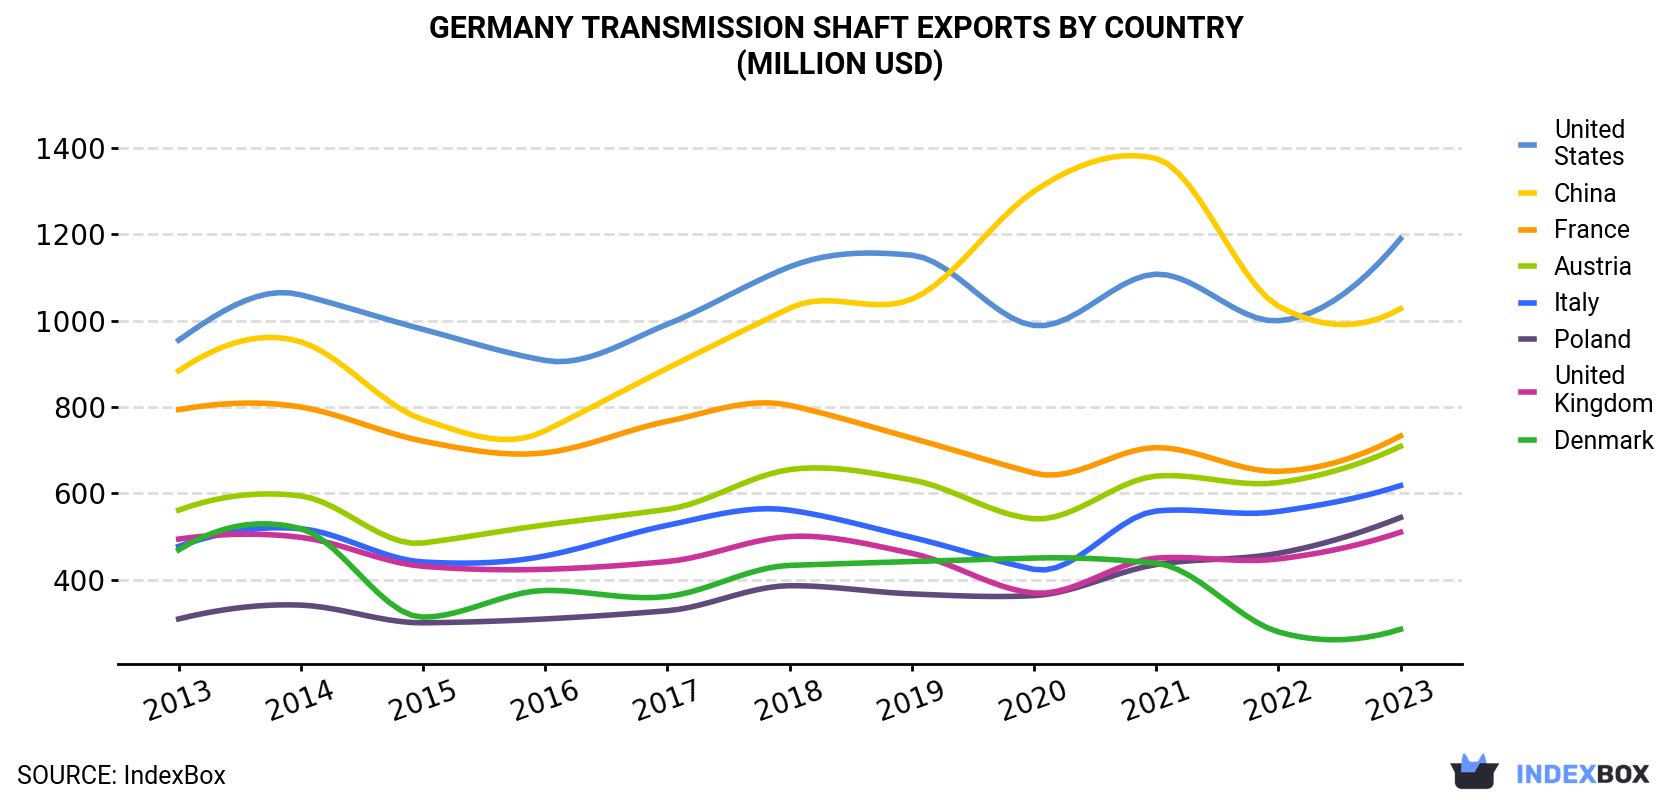 Germany Transmission Shaft Exports By Country (Million USD)